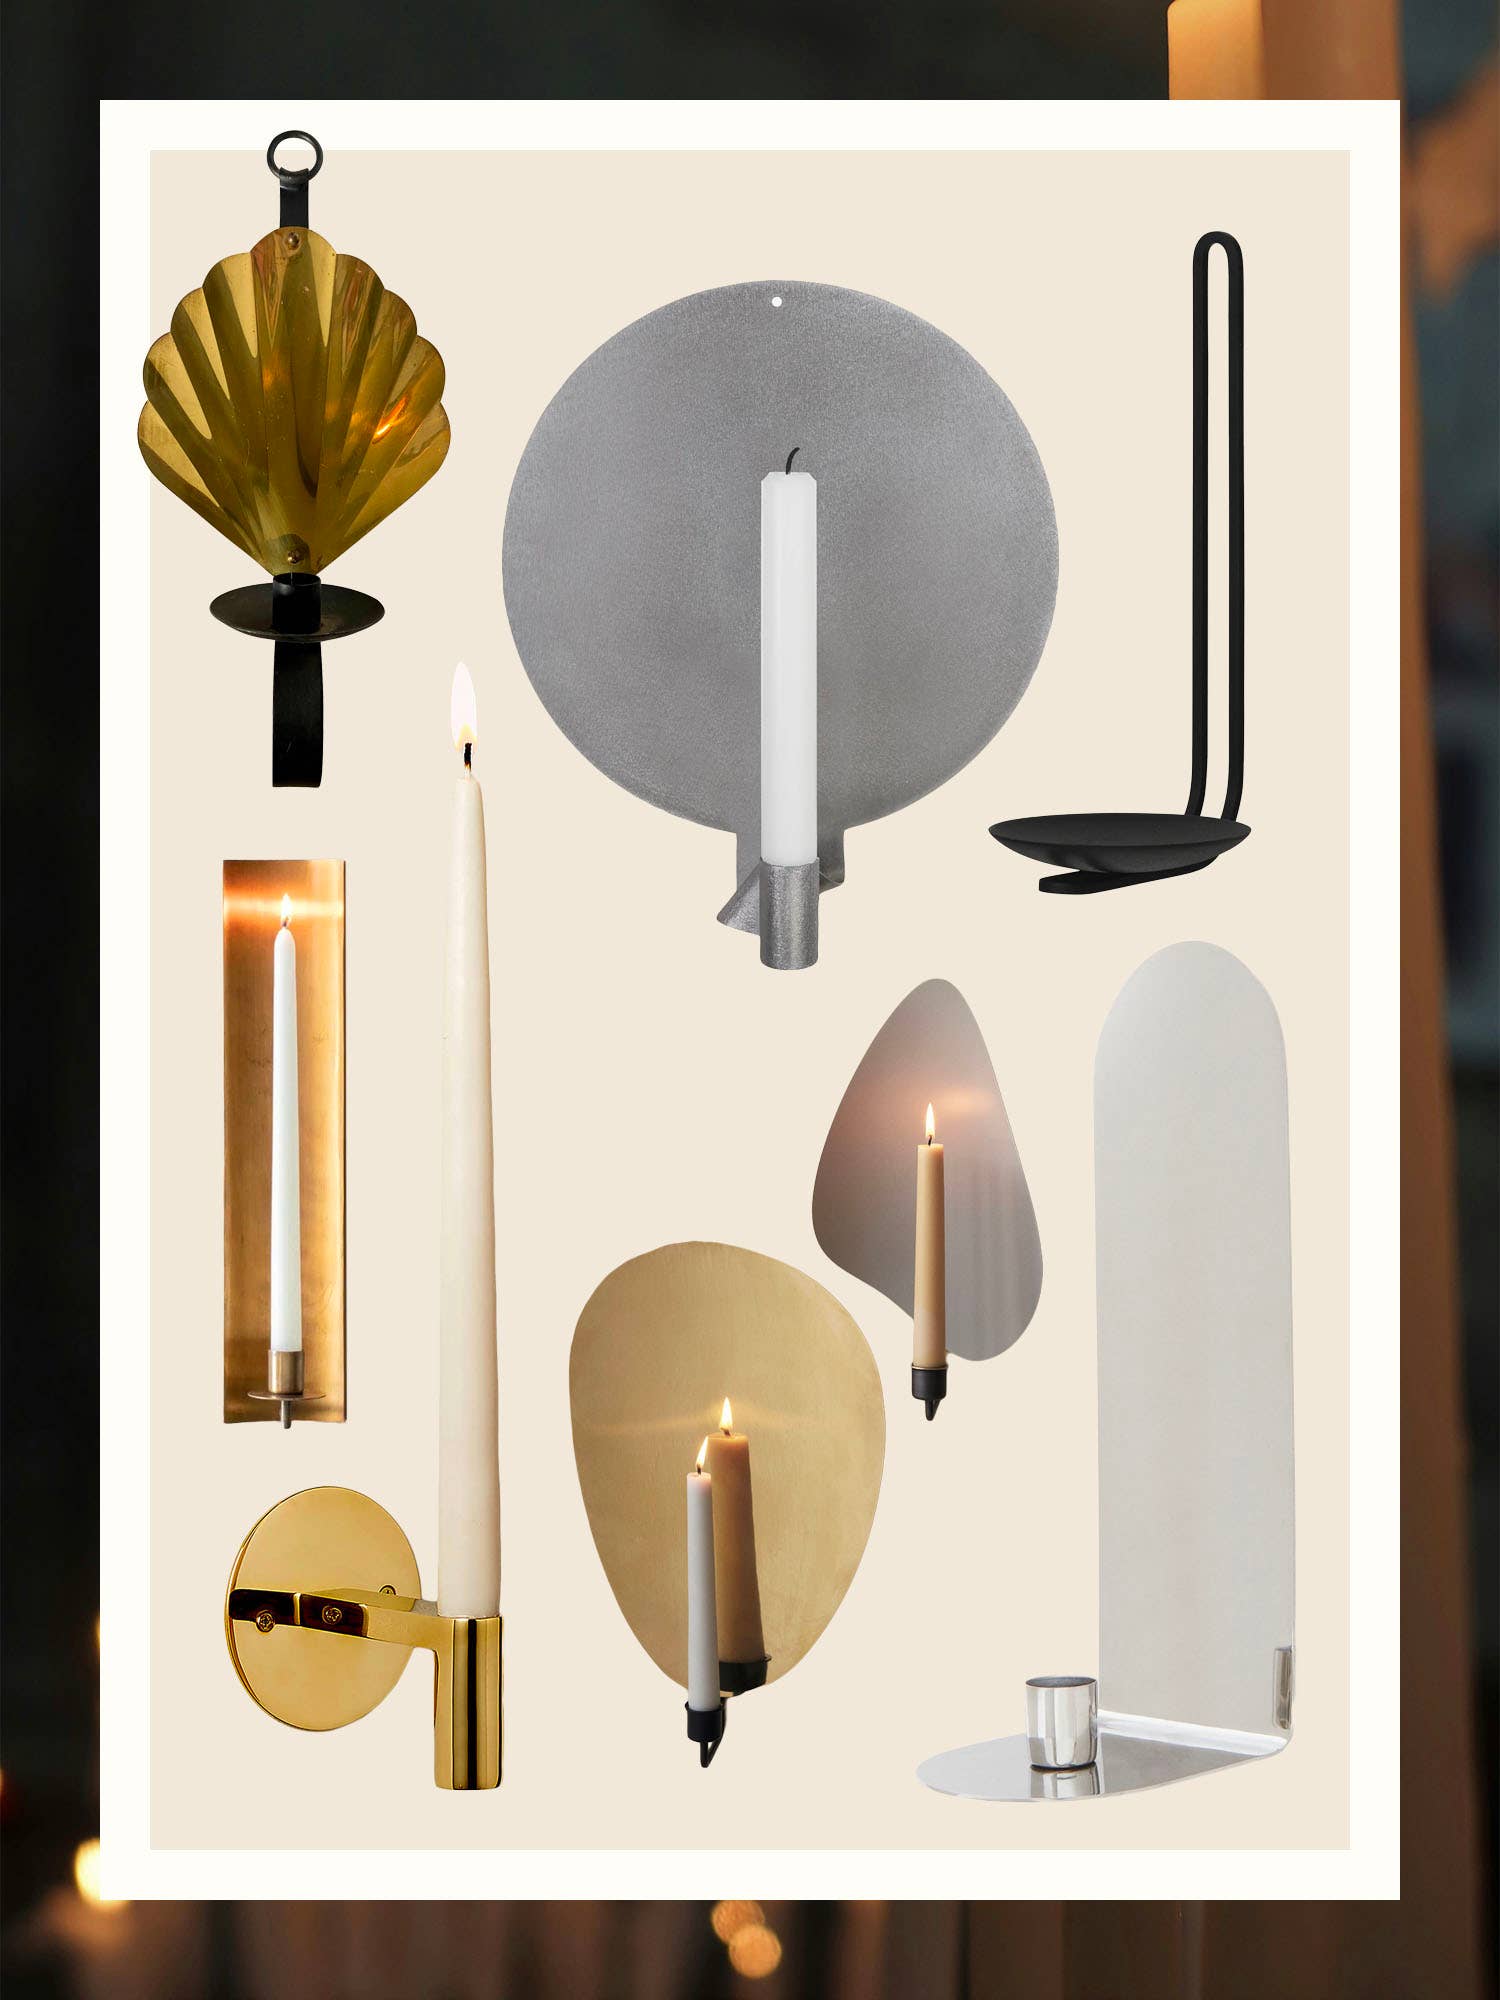 Moody Candle Wall Sconces Deliver More Romance Than a Lightbulb Ever Could